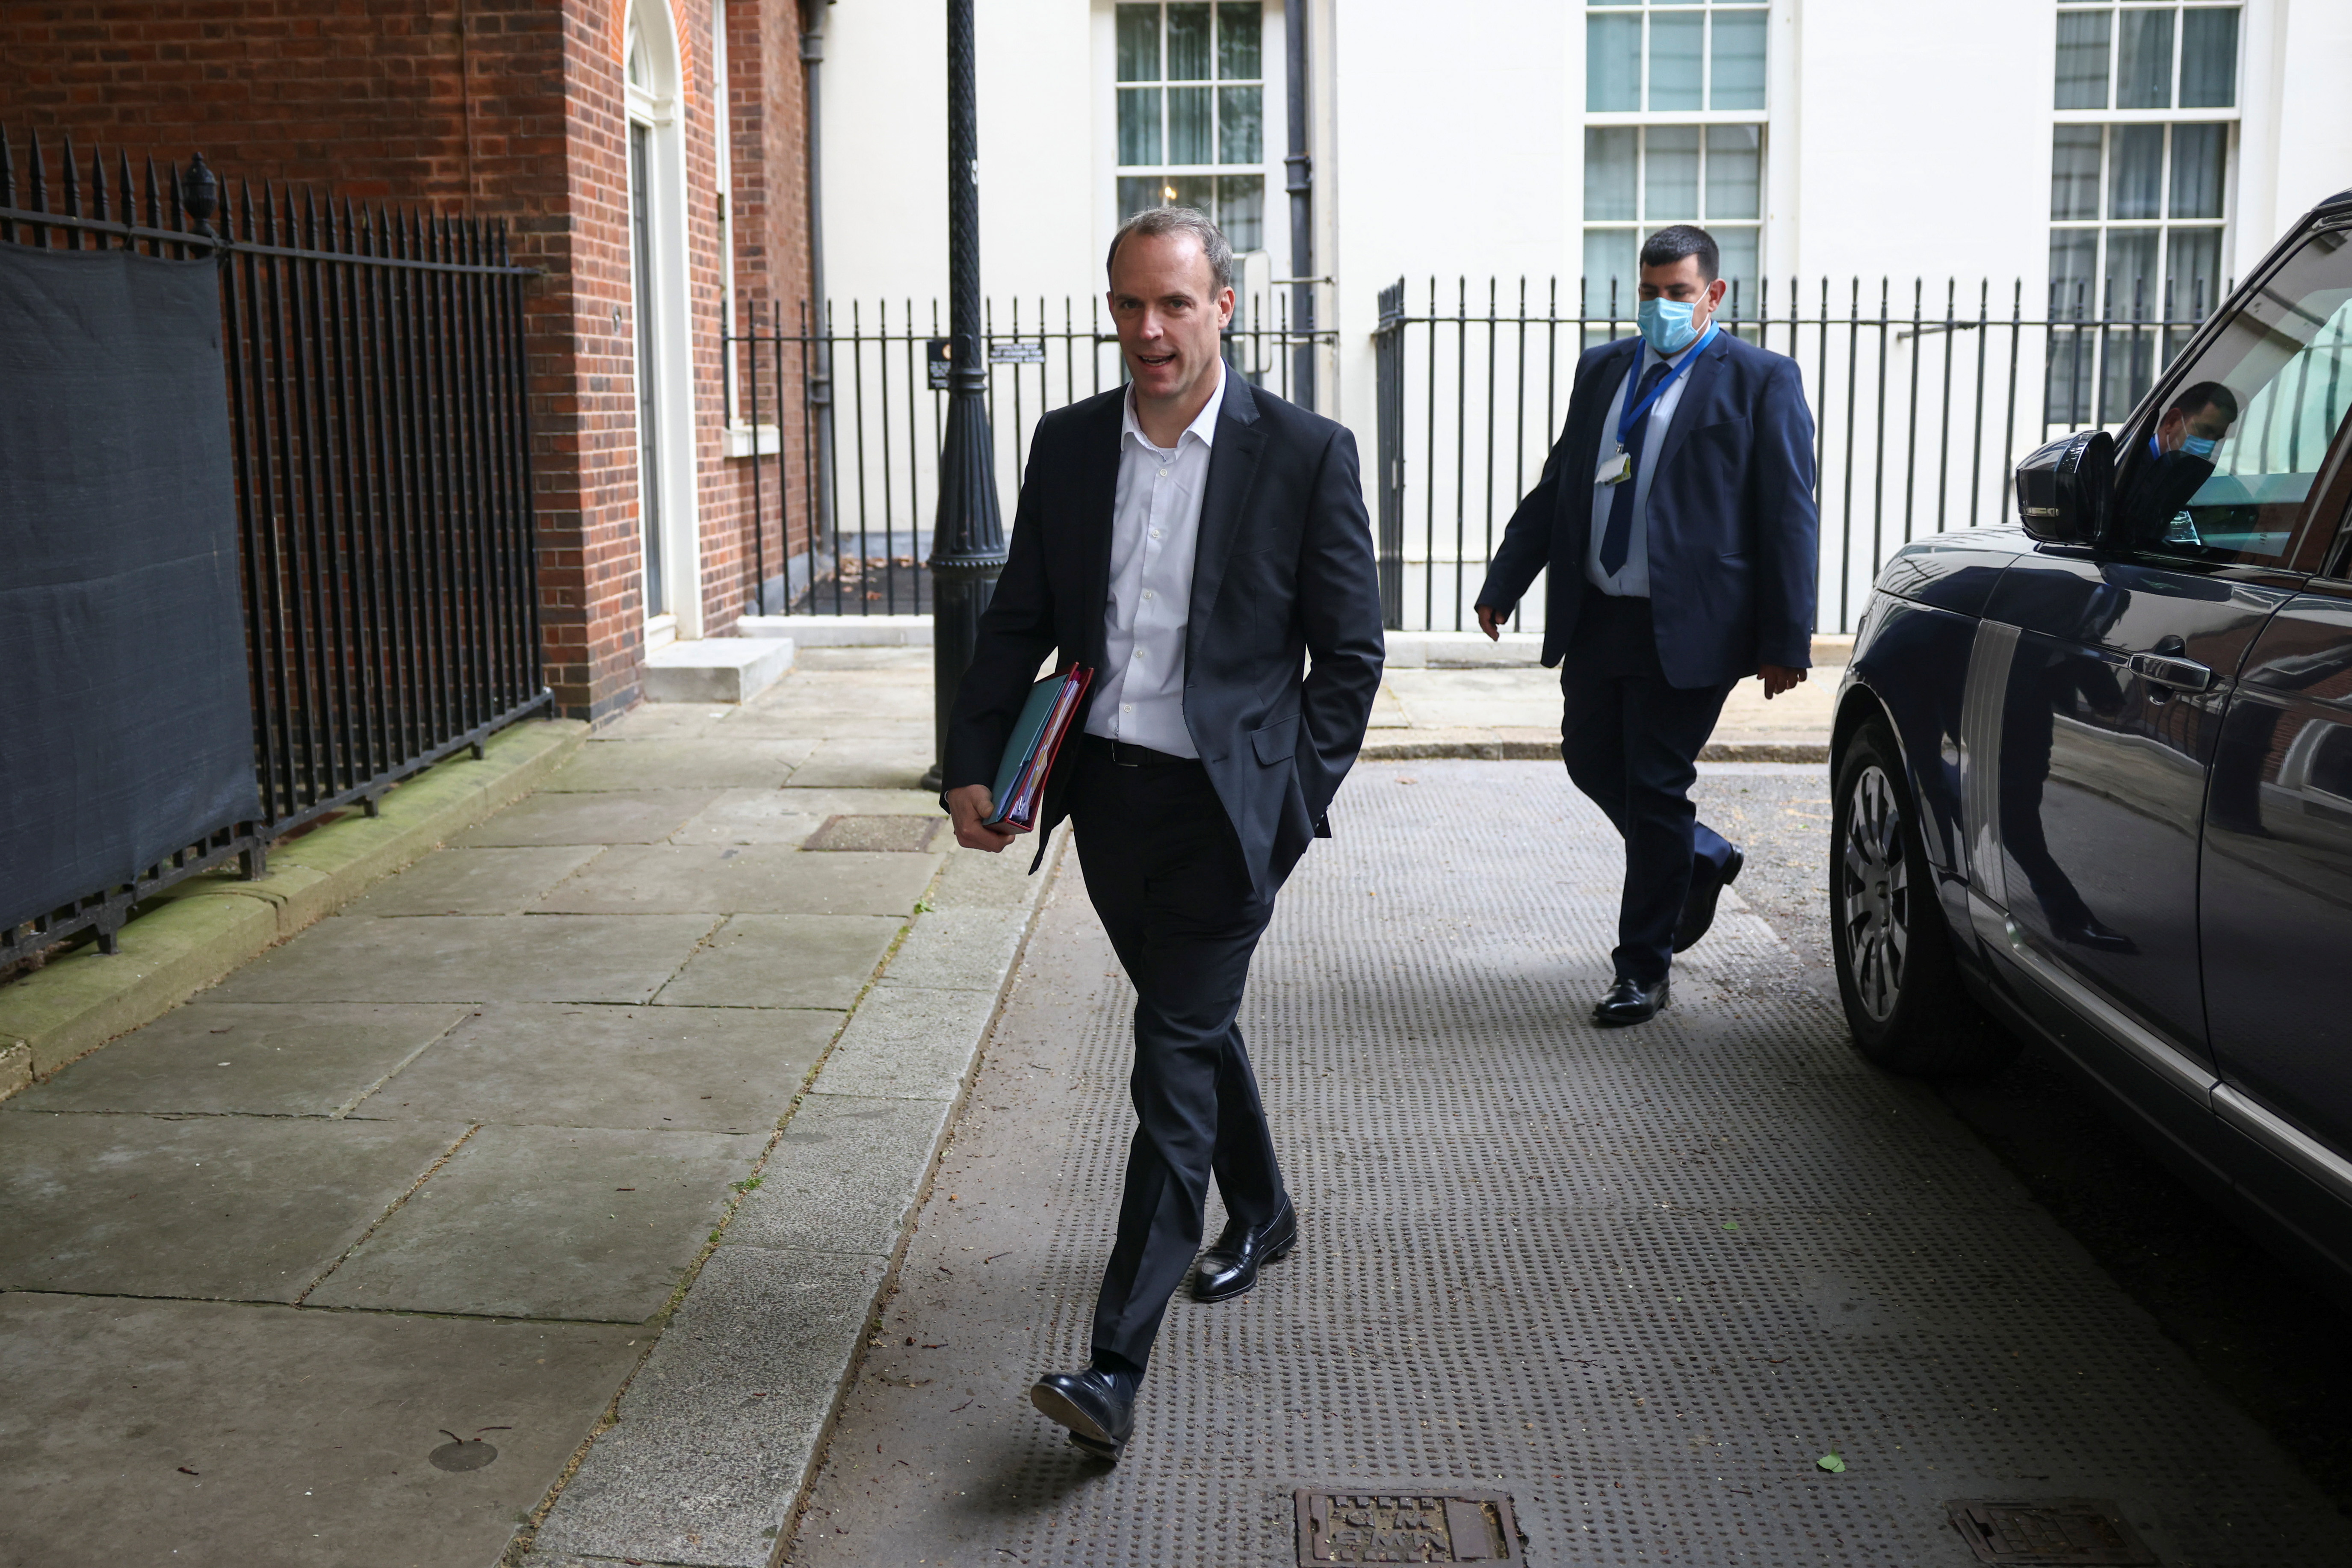 Britain's Foreign Secretary Dominic Raab walks on Downing Street, in London, Britain May 20, 2021. REUTERS/Henry Nicholls